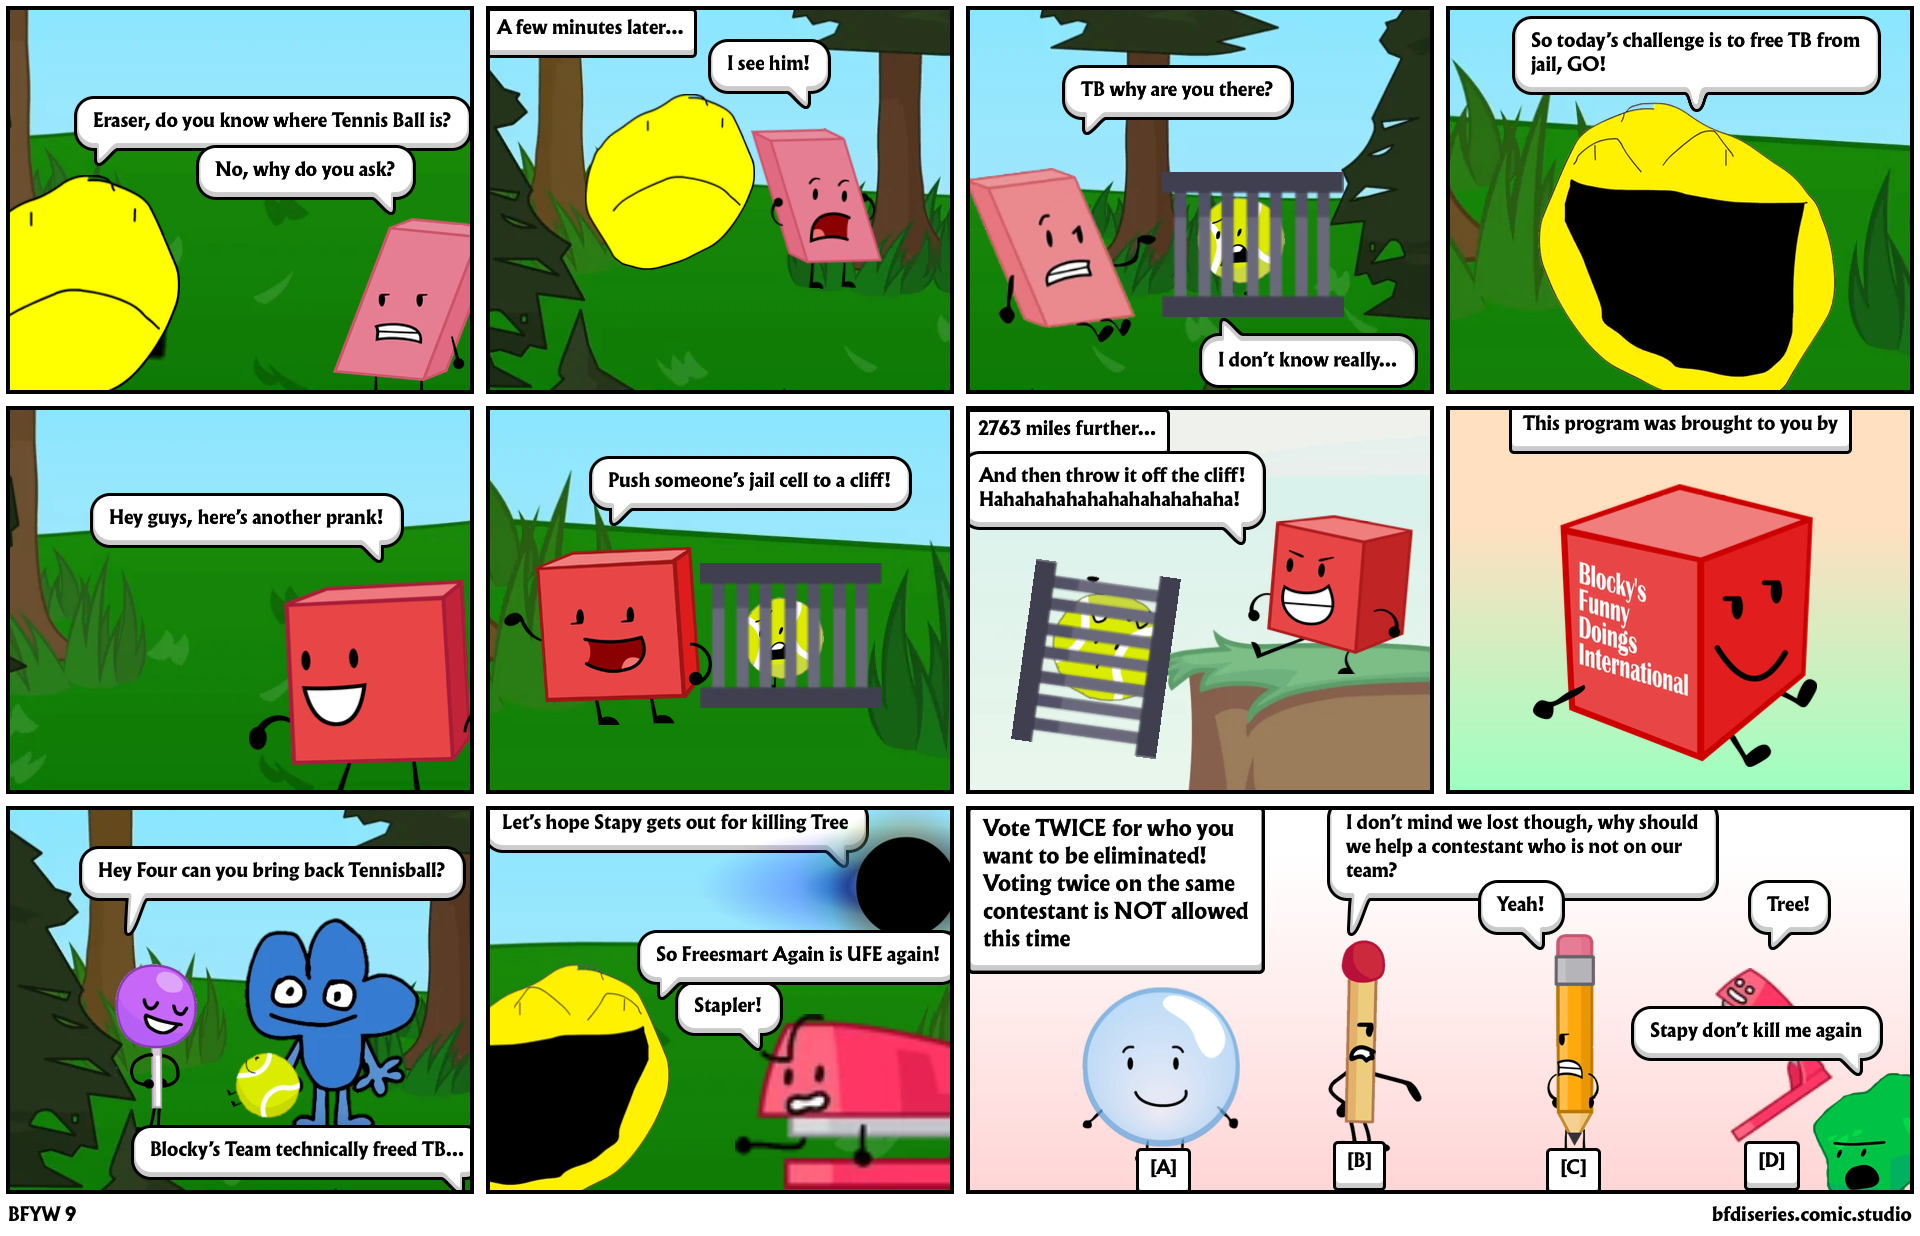 I Planned A French Dub For BFDI - Comic Studio